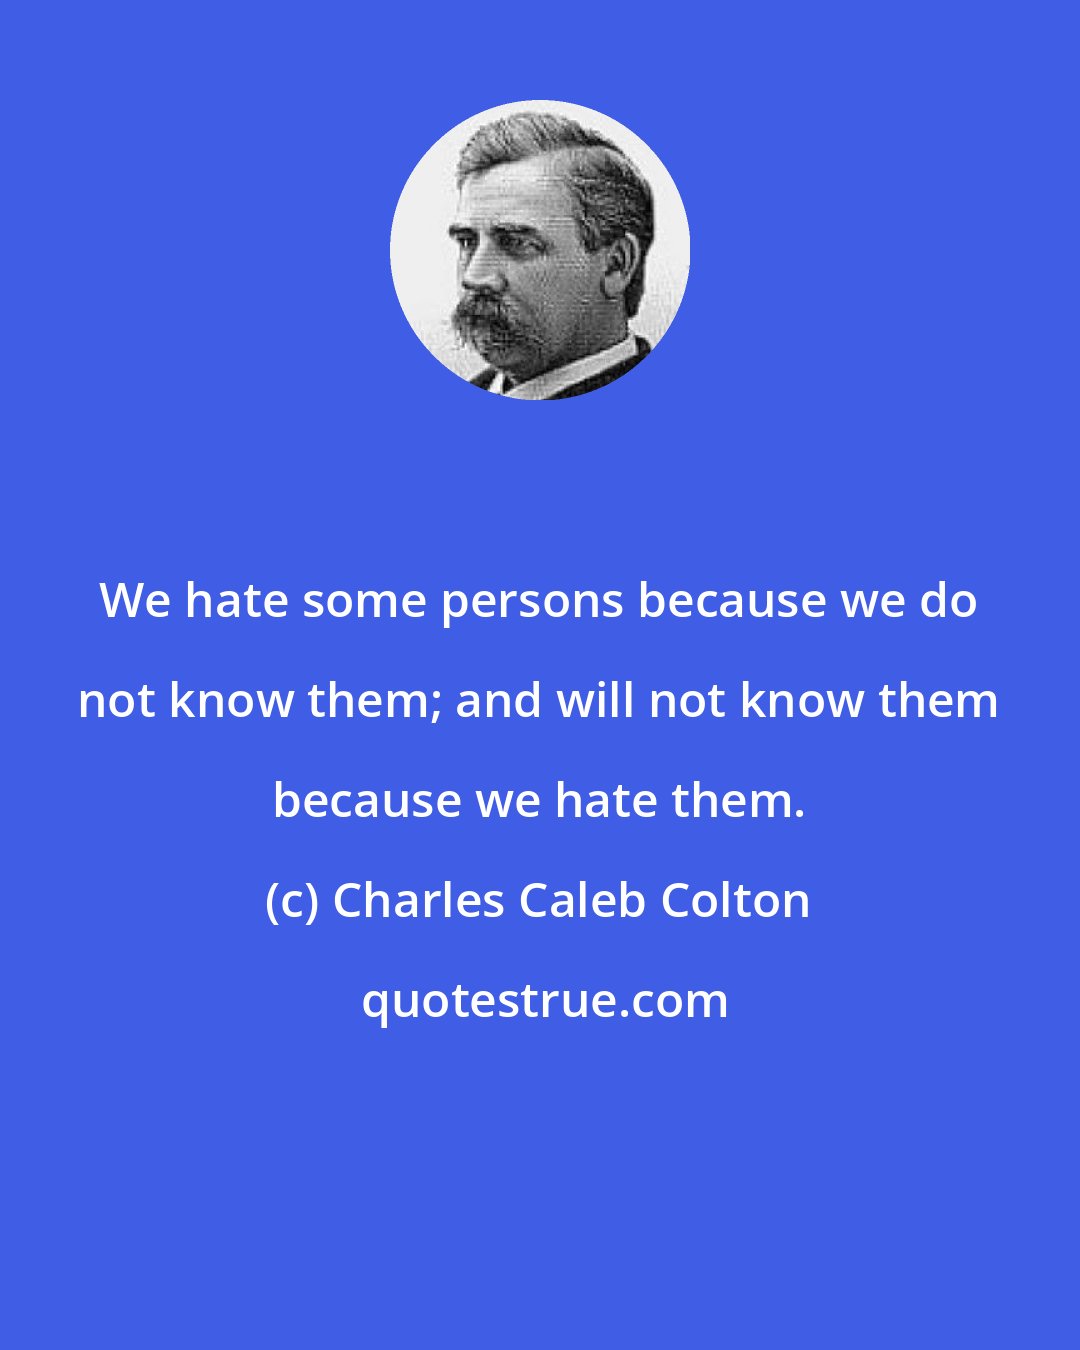 Charles Caleb Colton: We hate some persons because we do not know them; and will not know them because we hate them.